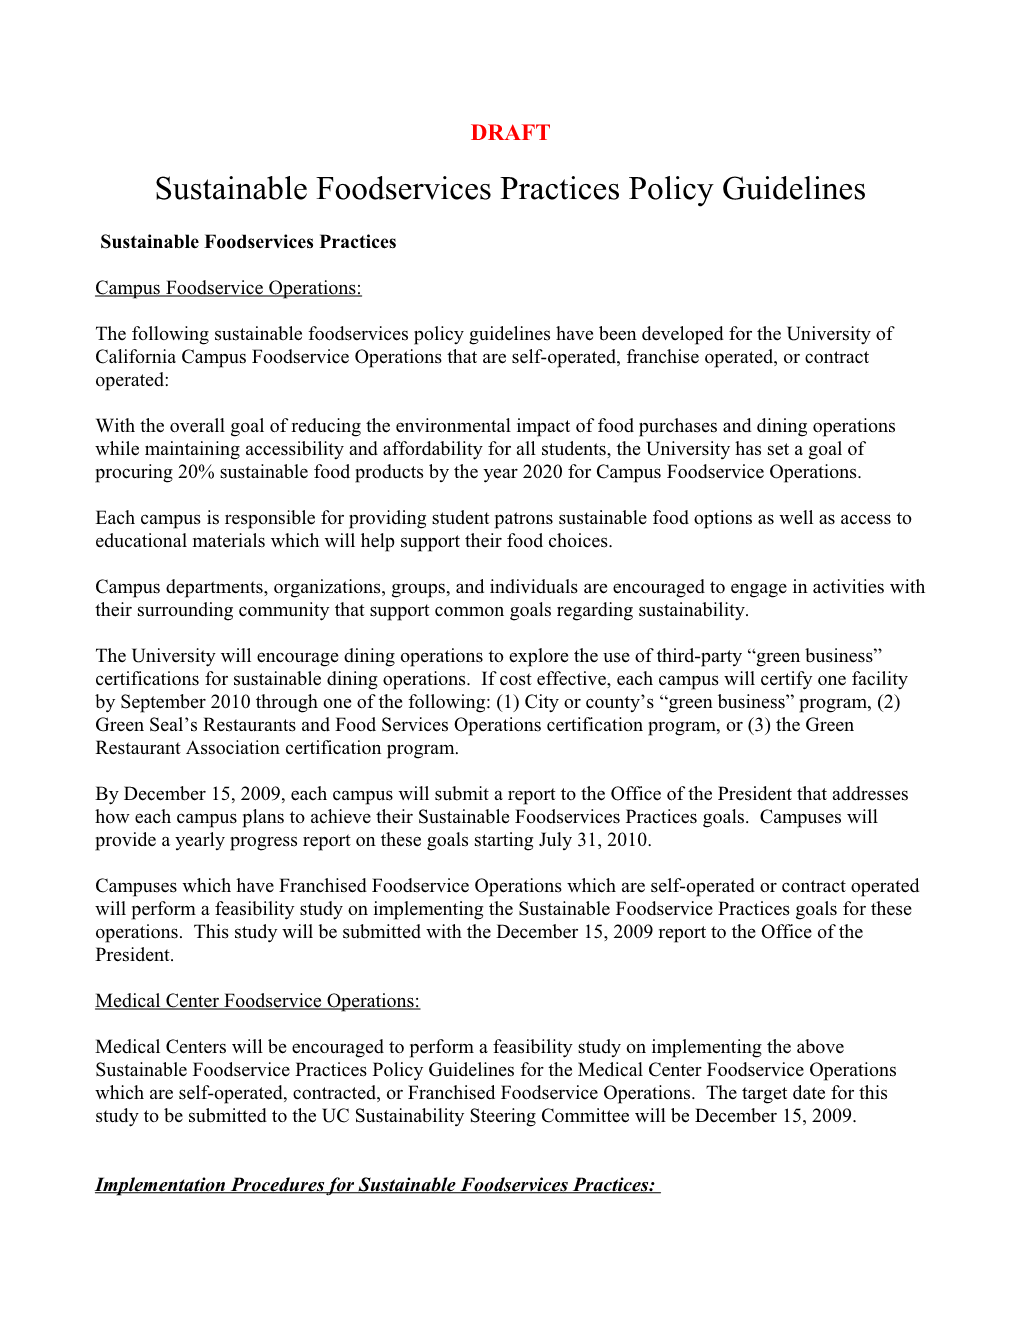 Implementation Procedures for Sustainable Foodservices Practices